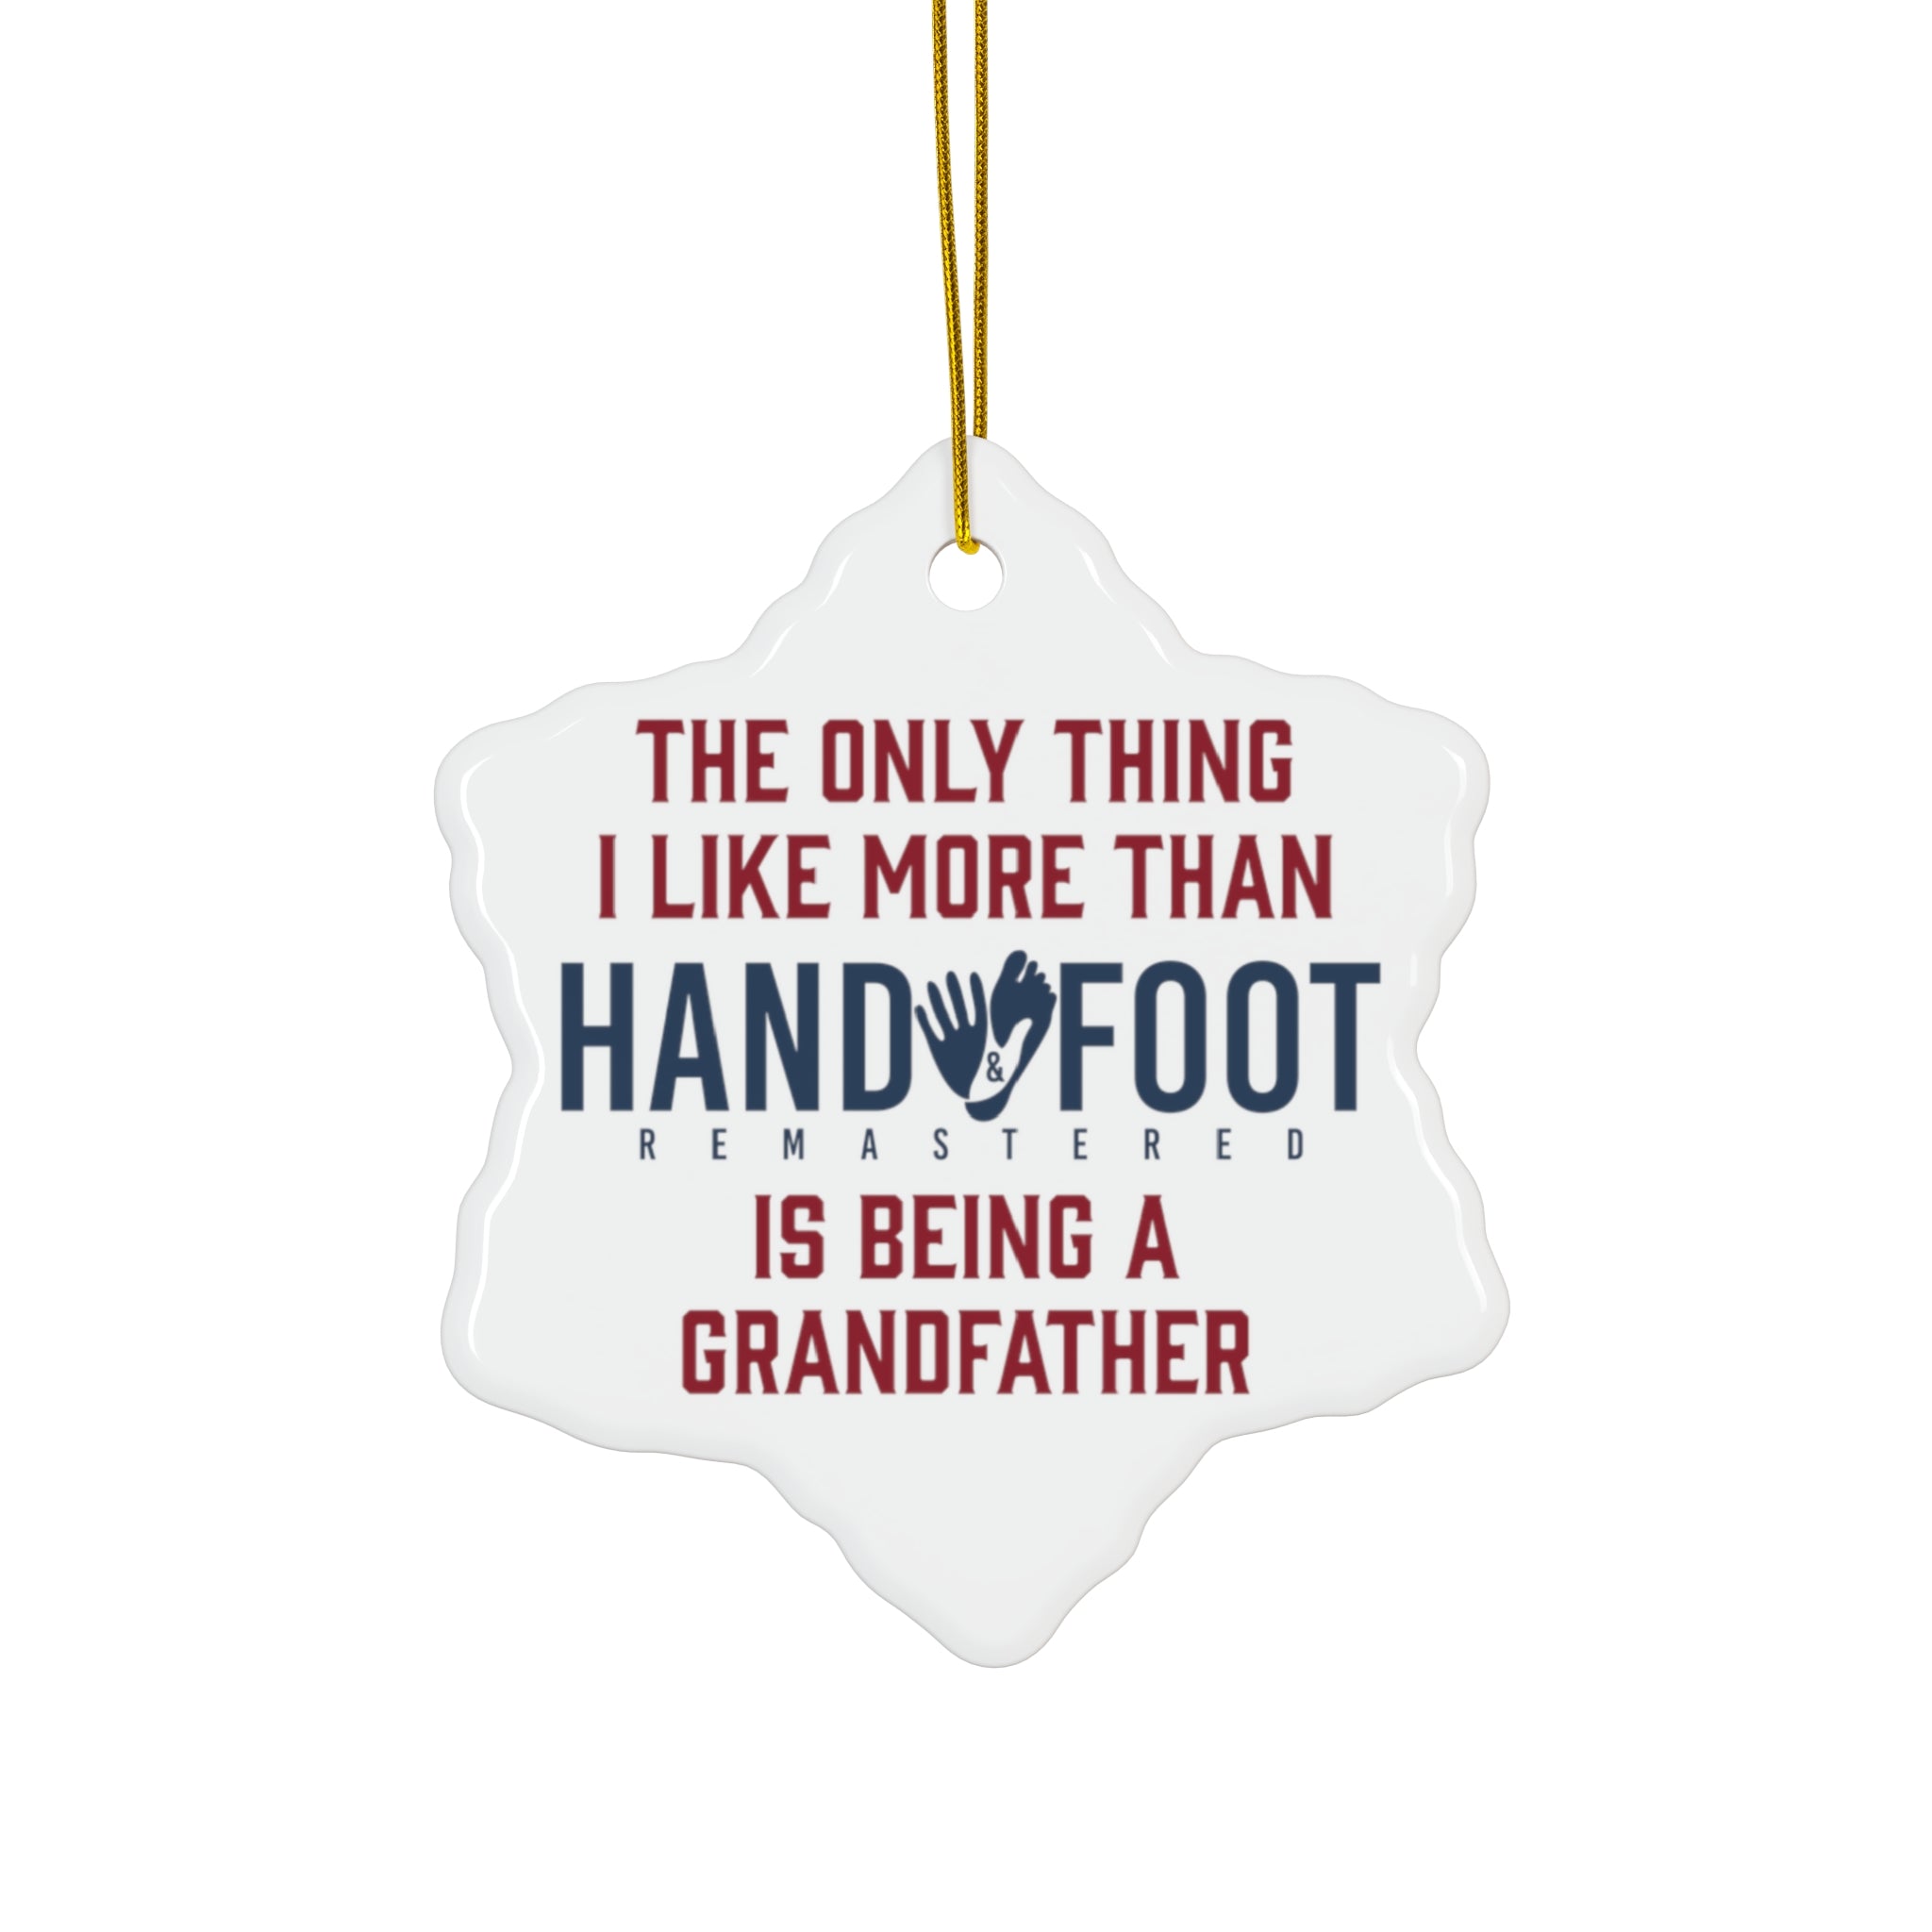 Being a Grandfather Ceramic Ornament, 3 Shapes